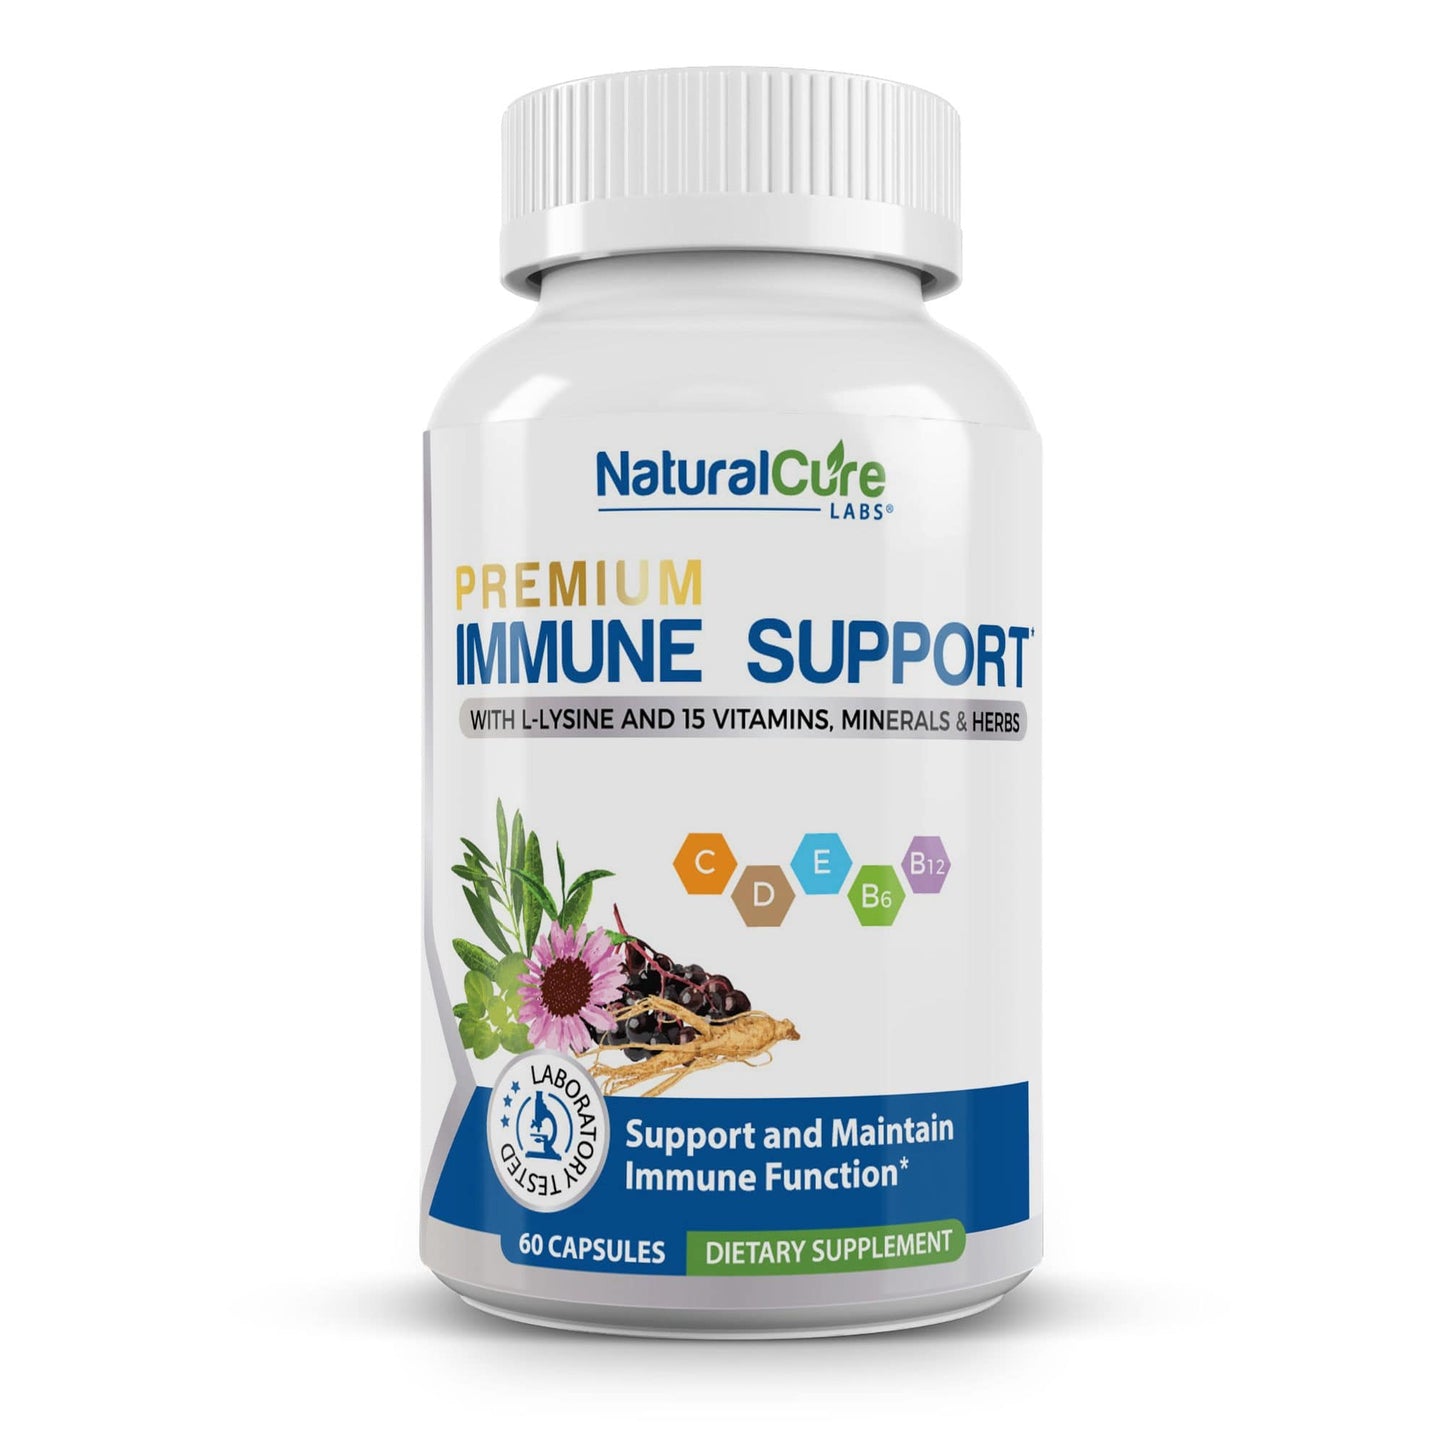 Front view of Natural Cure Labs Premium Immune Support dietary supplement bottle. It contains a potent blend with L-Lysine and 15 other vitamins, minerals, and herbs aimed at supporting and maintaining immune function, encapsulated in 60 vegetarian capsules. The packaging emphasizes the supplement's role in contributing to overall immune health.